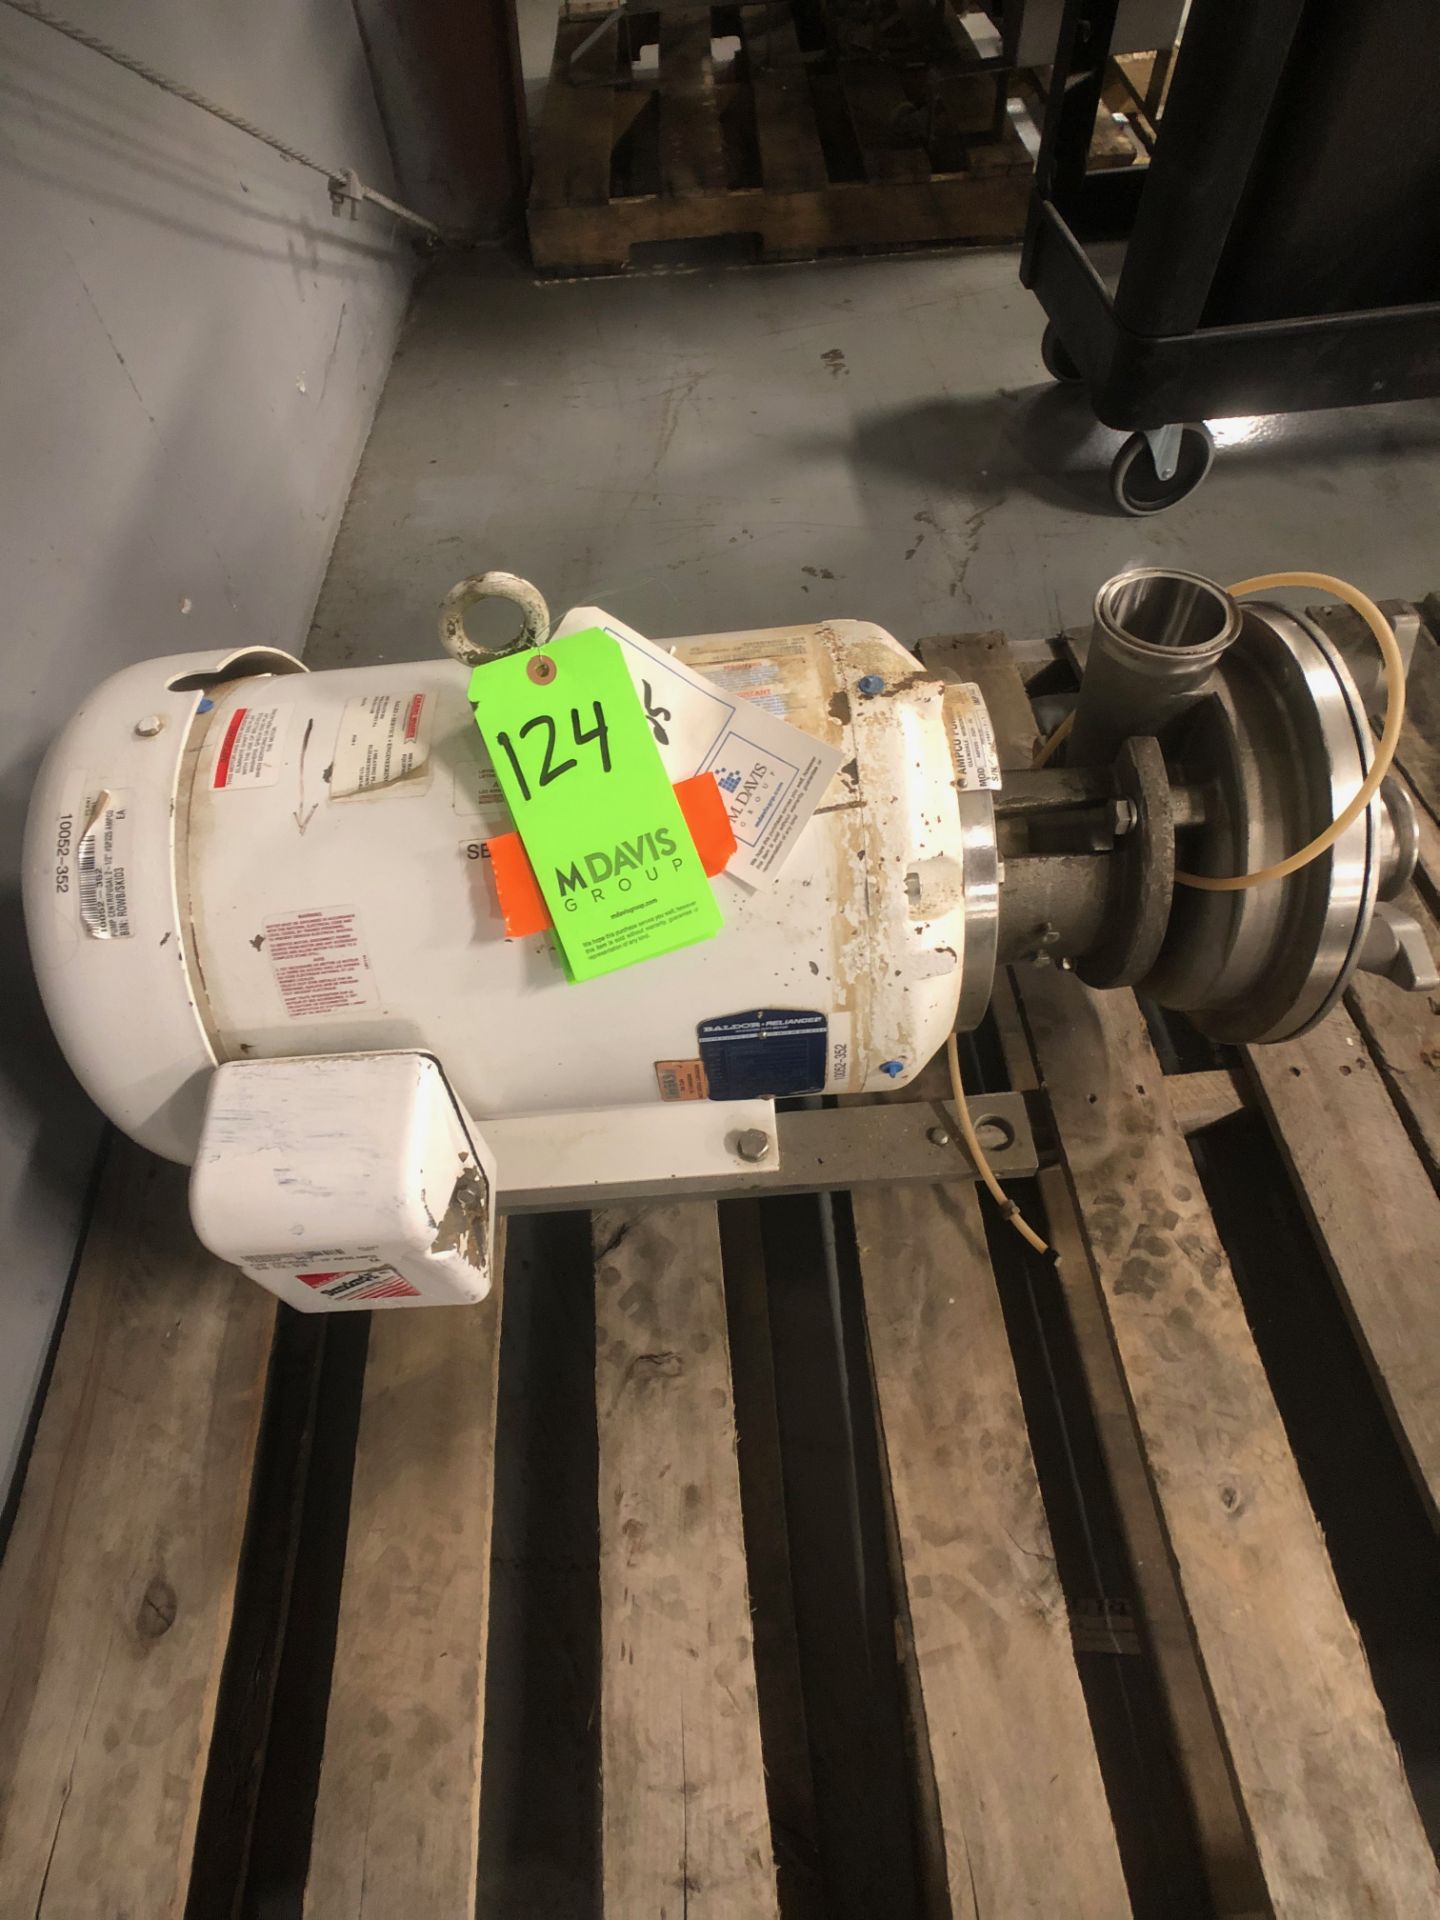 Ampco 20 hp Centrifugal Pump, Model ASP225-2525-25, SN CC-61941-1-1, with 2.5" x 2.5" Clamp Type